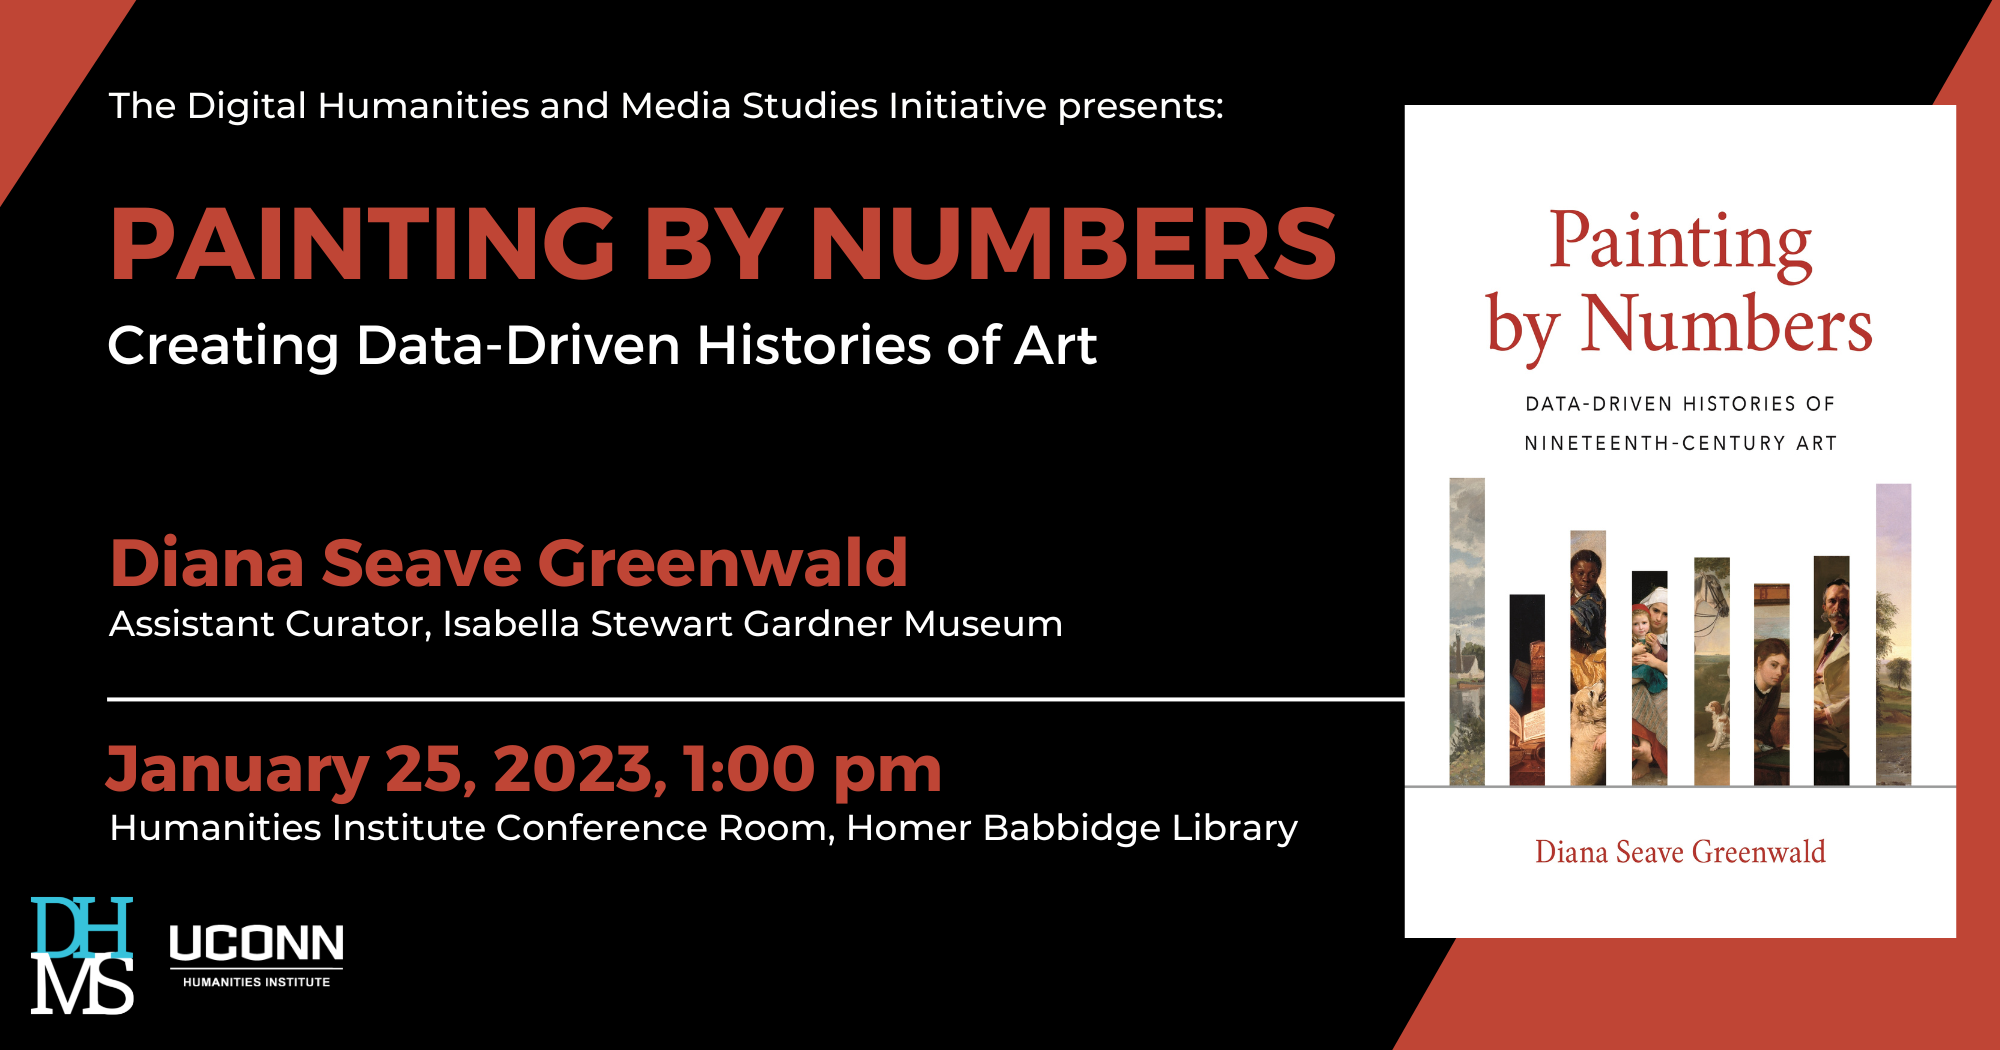 The Digital Humanities and Media Studies Initiative Presents: Painting by Numbers: Creeaeting Data-Driven Histories of Art. Diana Seave Greenwald, Assistant Curator, Isabella Stewart Gardner Museum. January 25, 2023, 1:00pm. Humanities Institute Conference Room, Homer Babbidge Library.